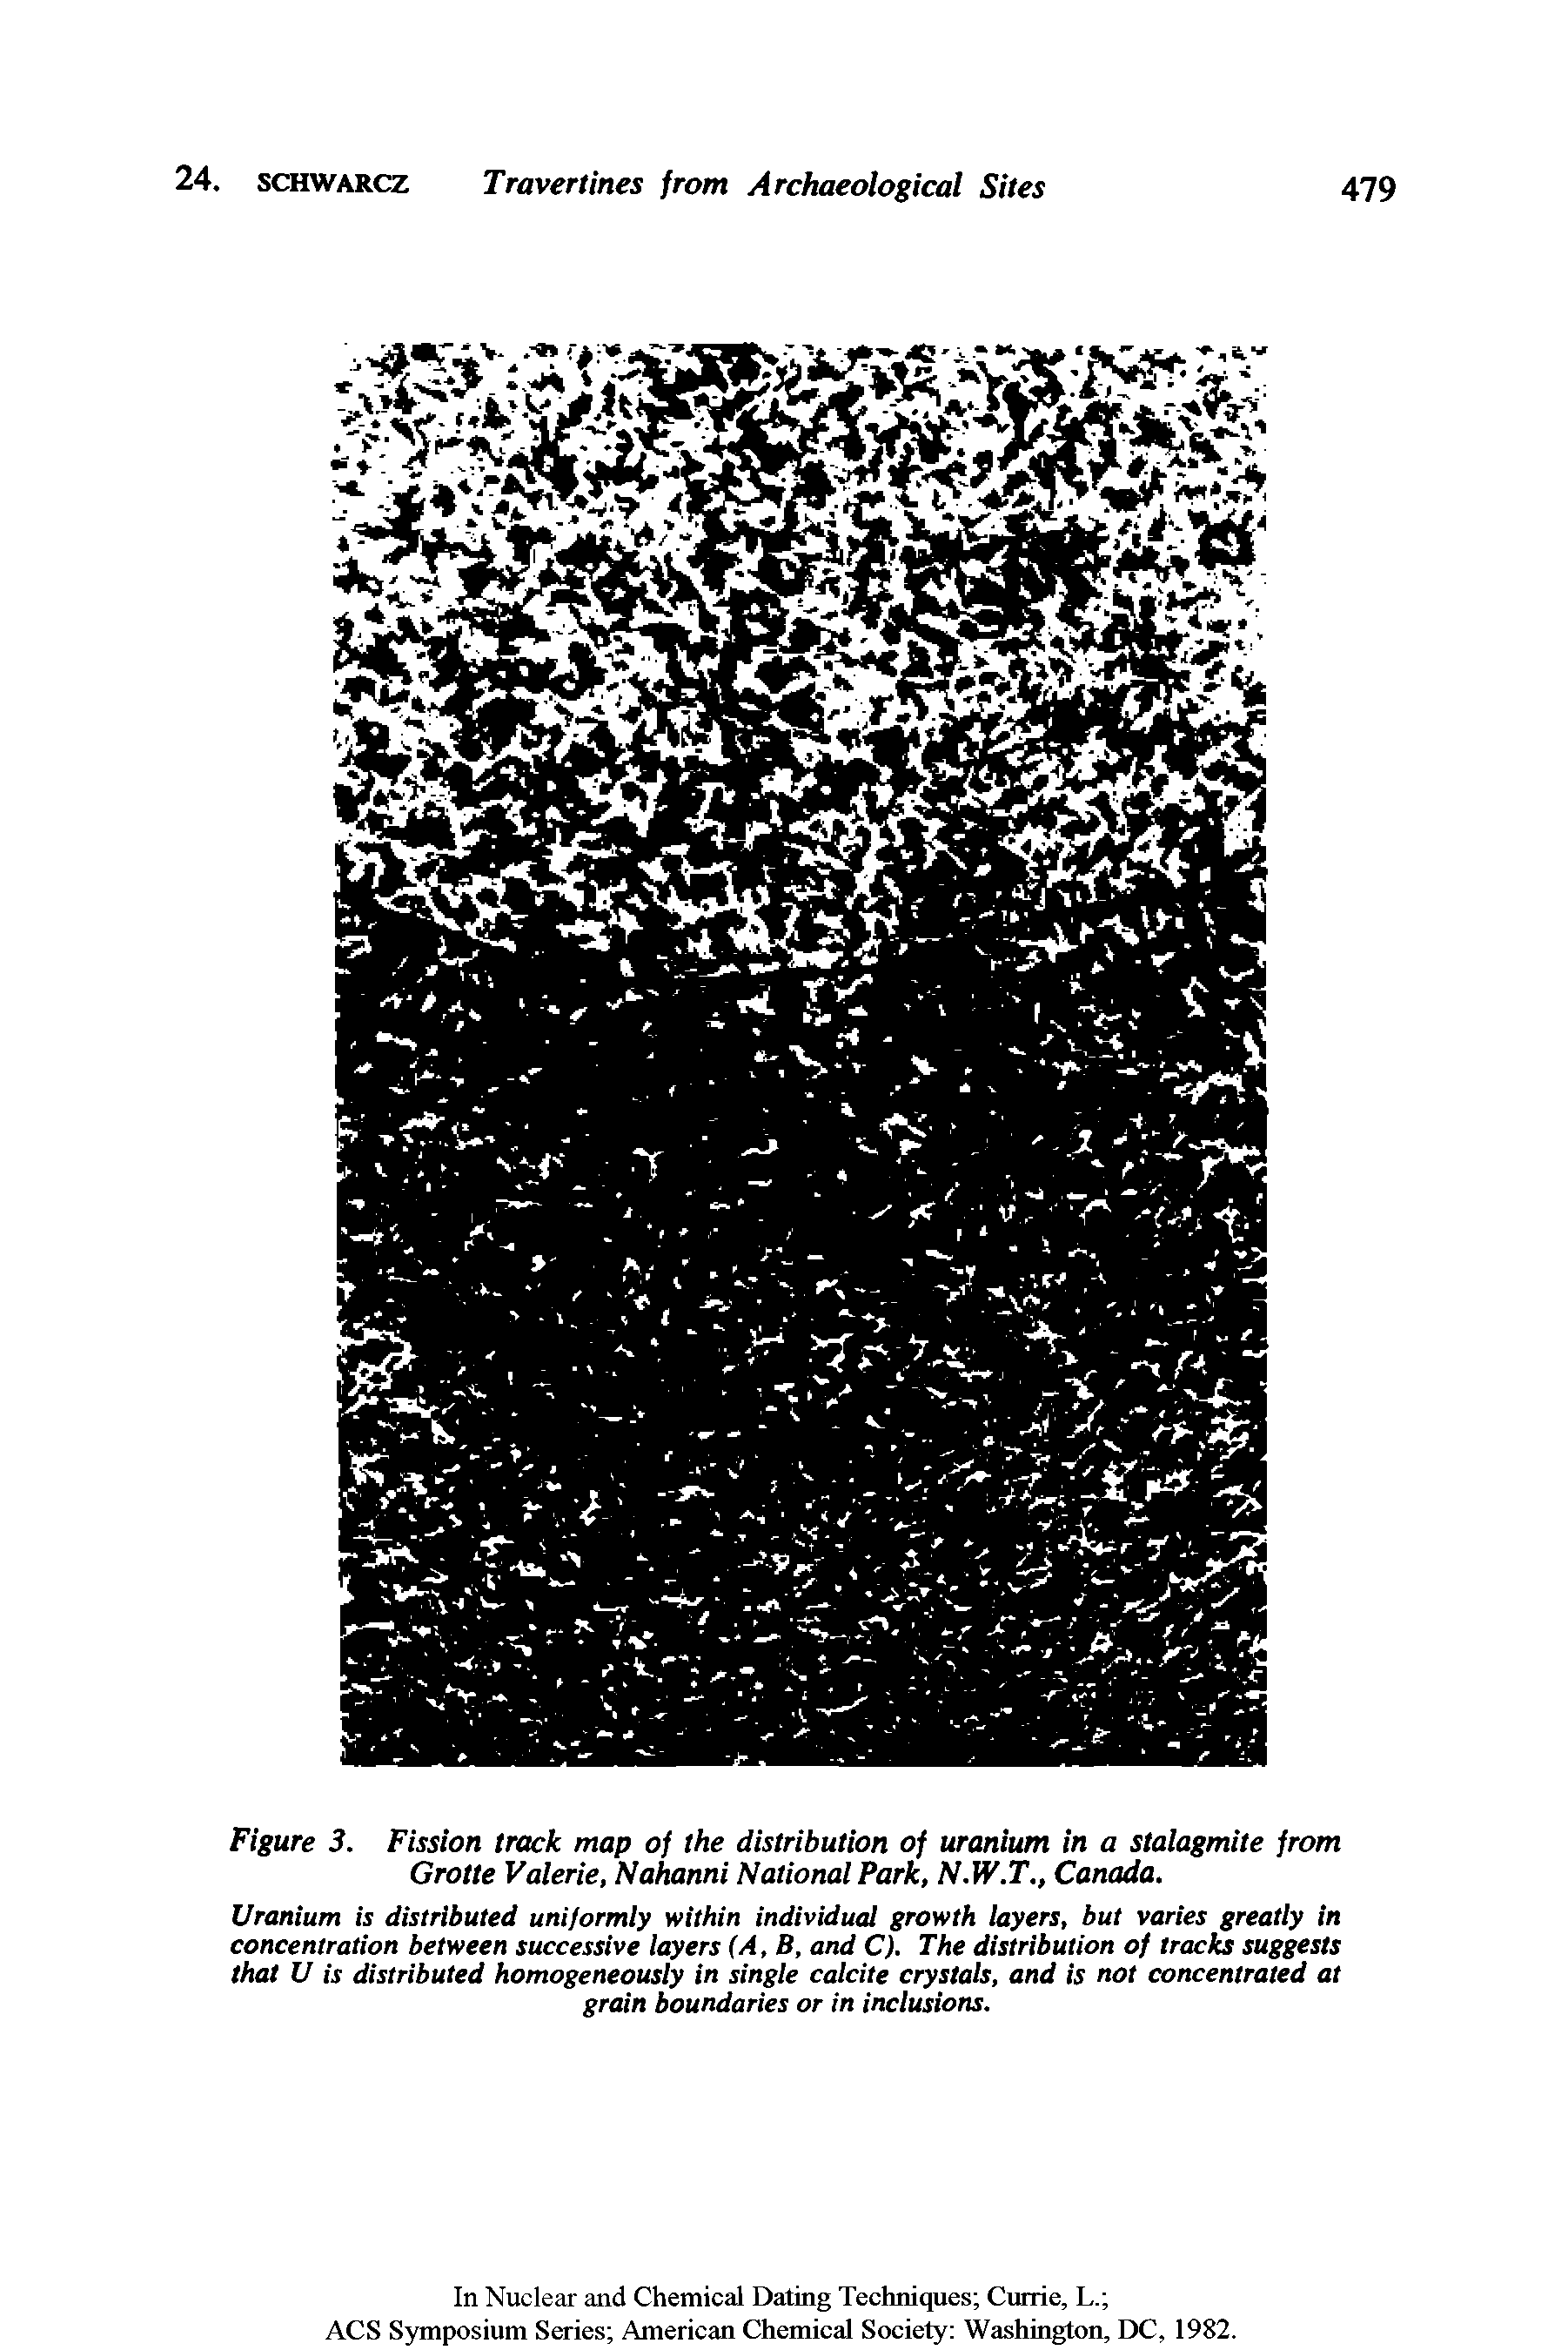 Figure 3. Fission track map of the distribution of uranium in a stalagmite from Grotte Valerie, Nahanni National Park, N.W.T., Canada.